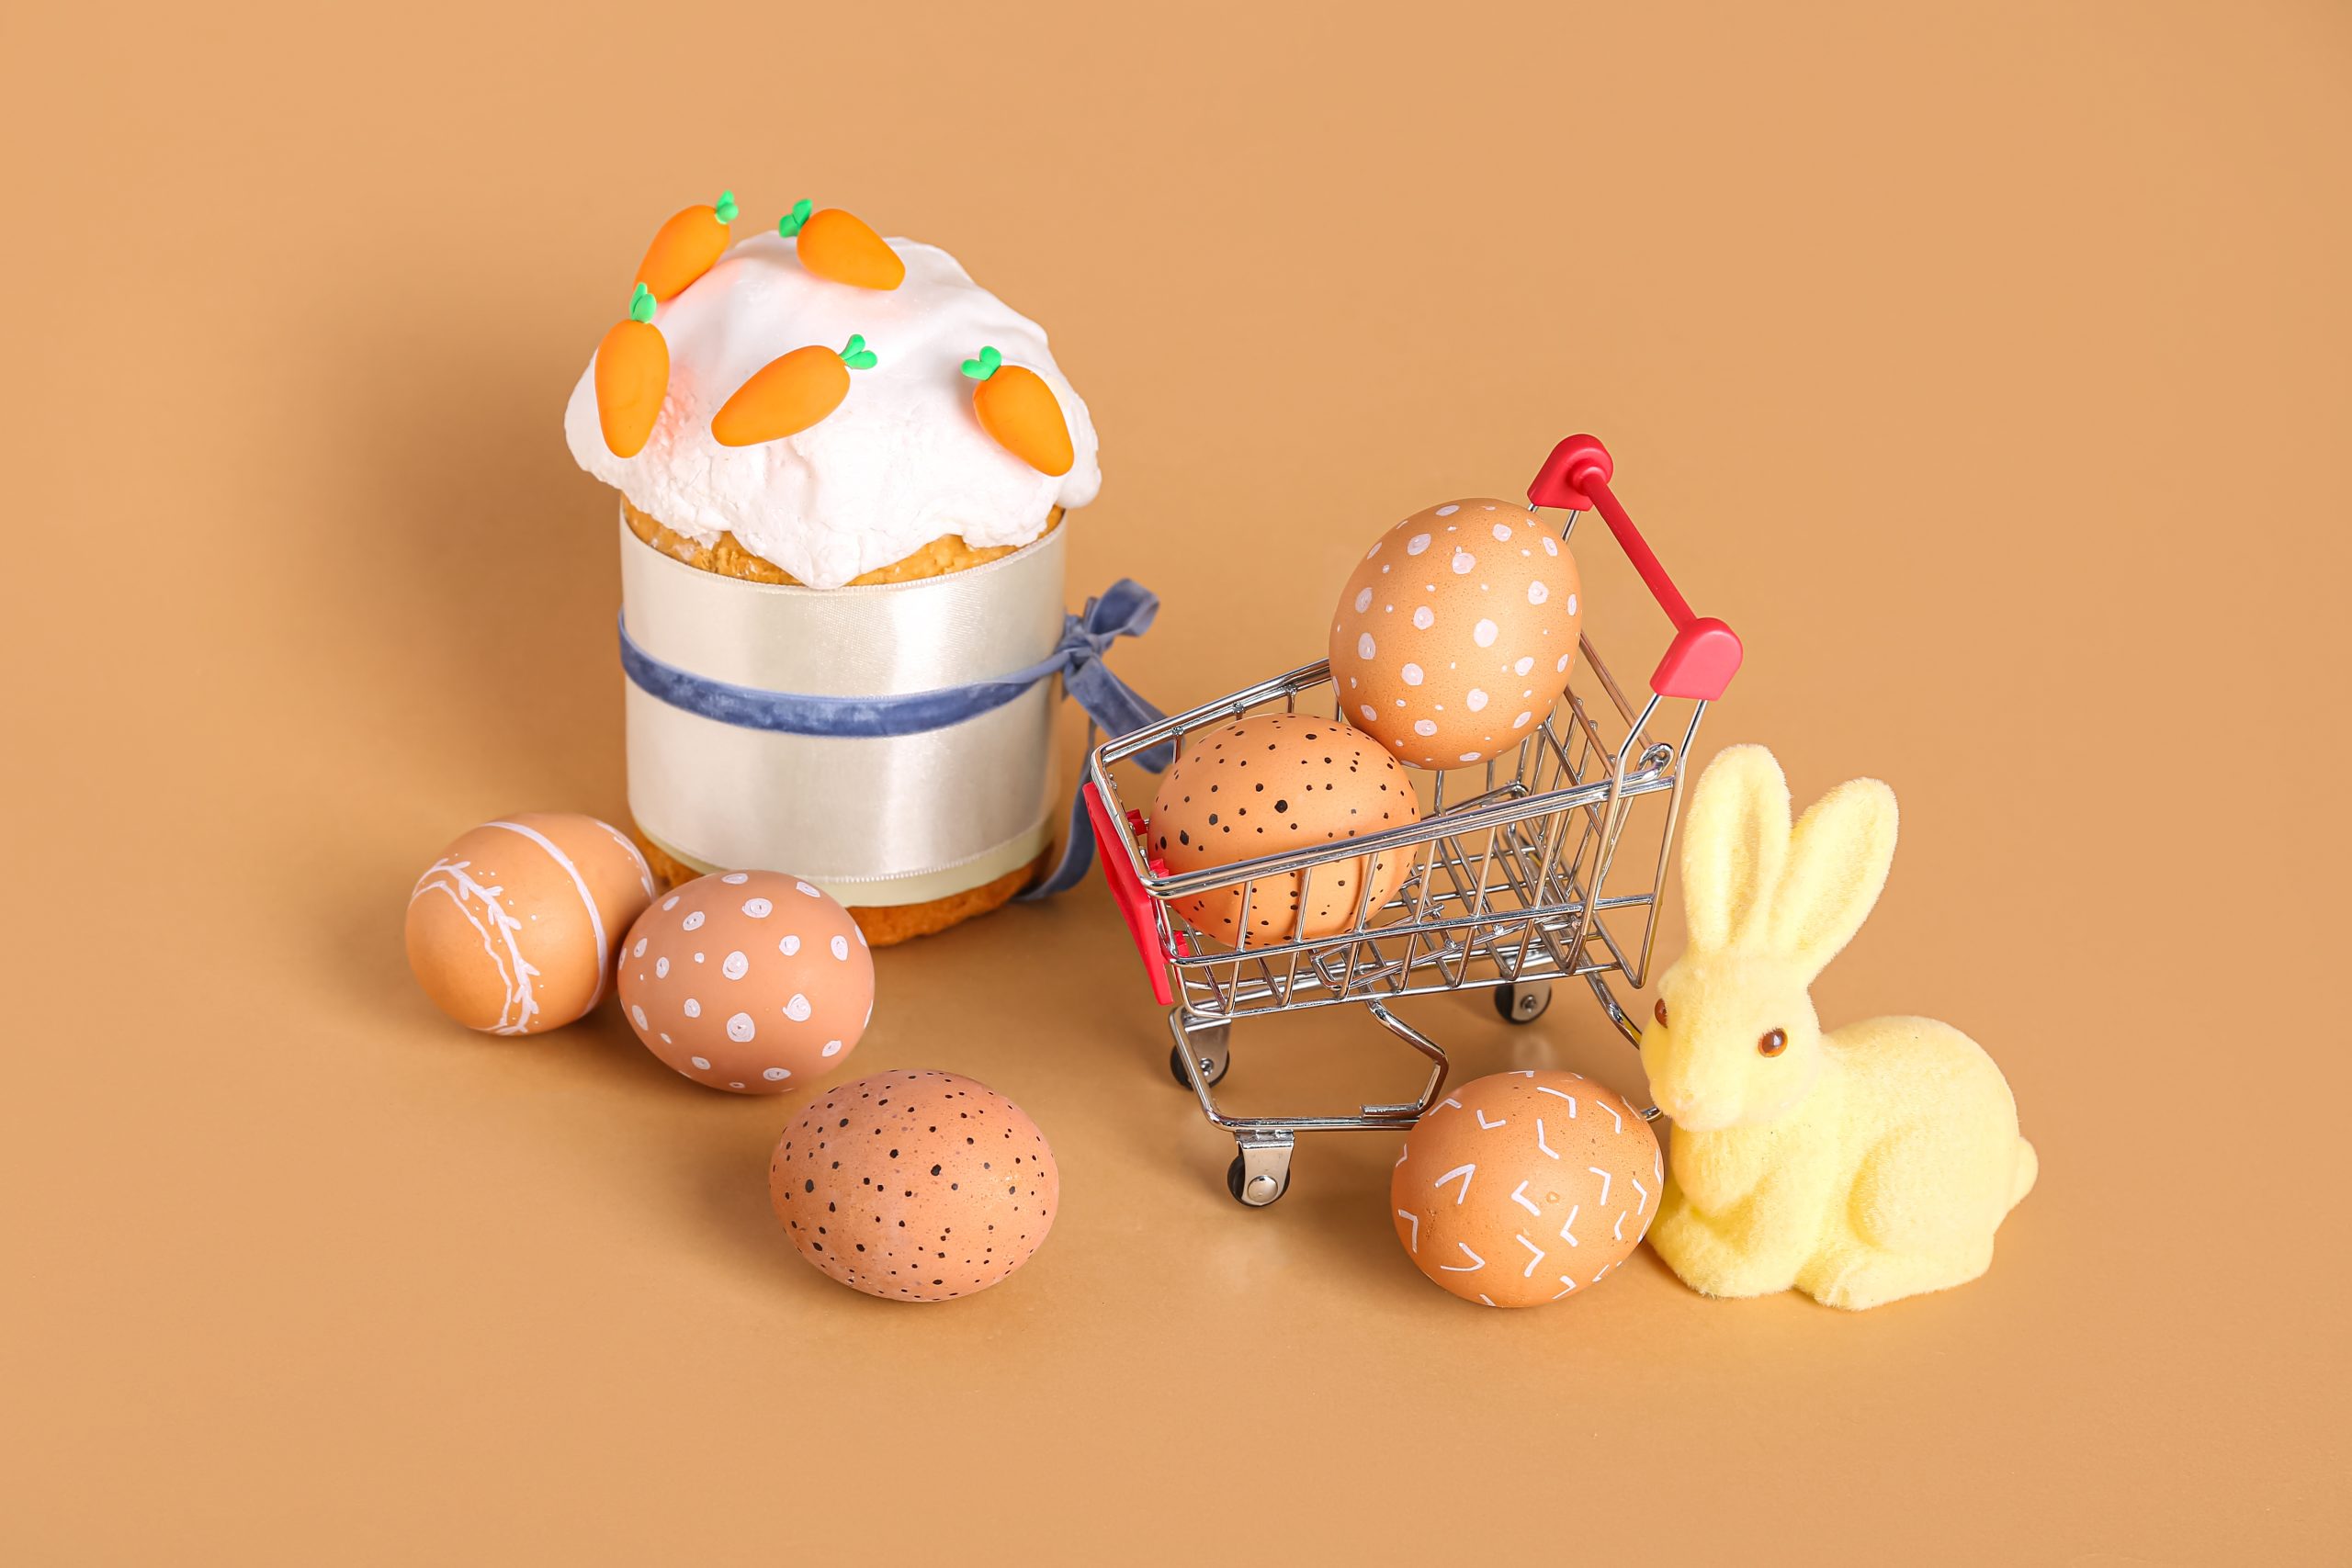 Early Easter gives positive sales boost